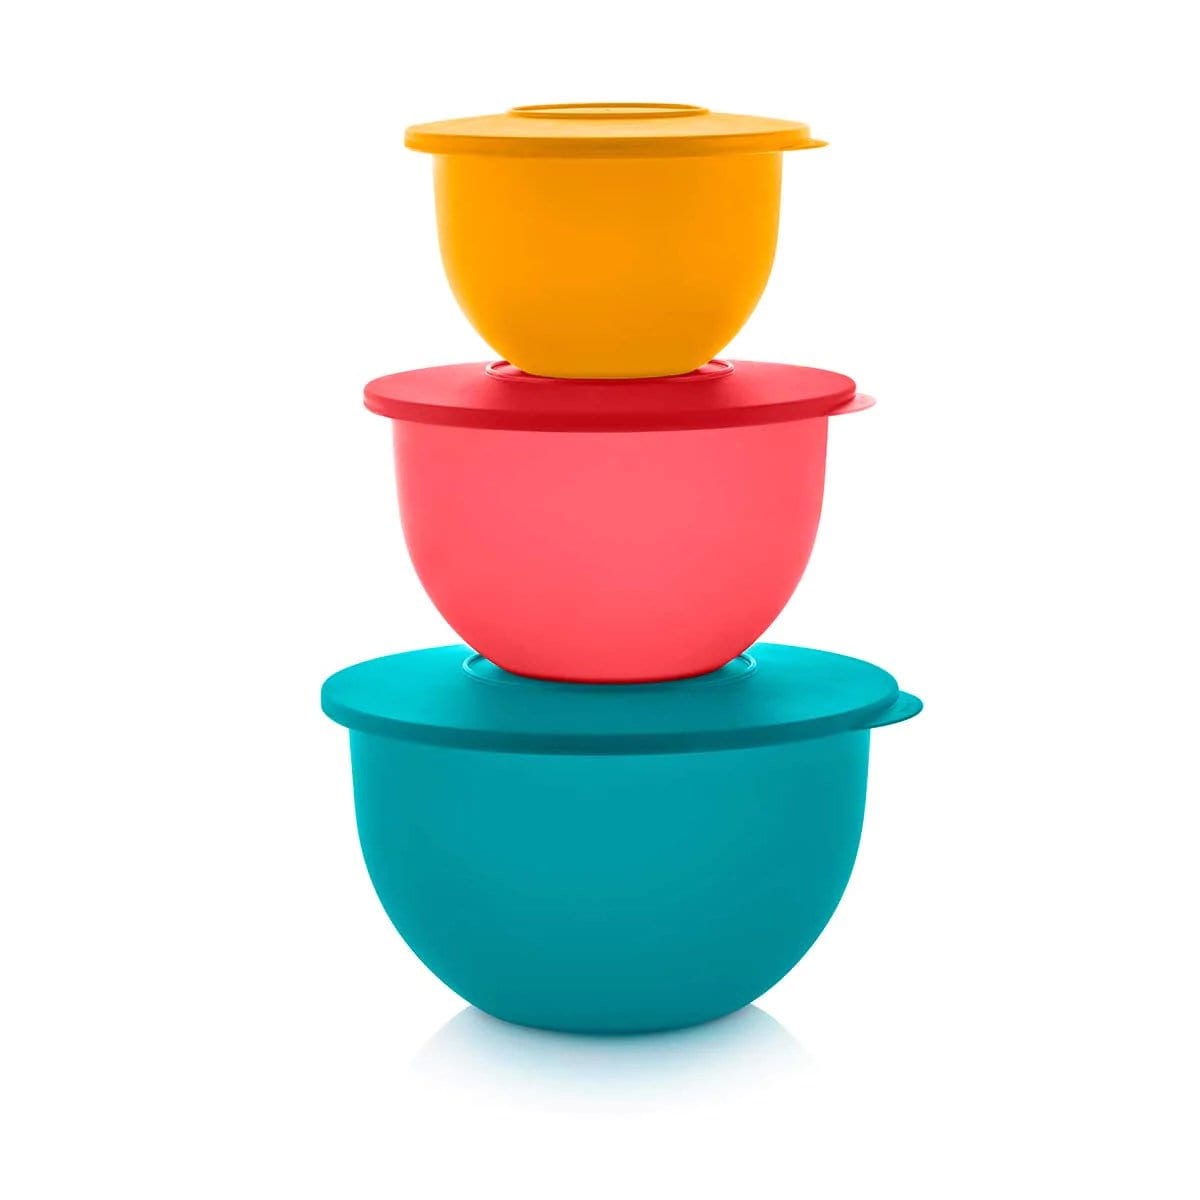 Brand New Tupperware EXTRA BIG WONDERS LARGE BOWLS (4) 3 Cups each